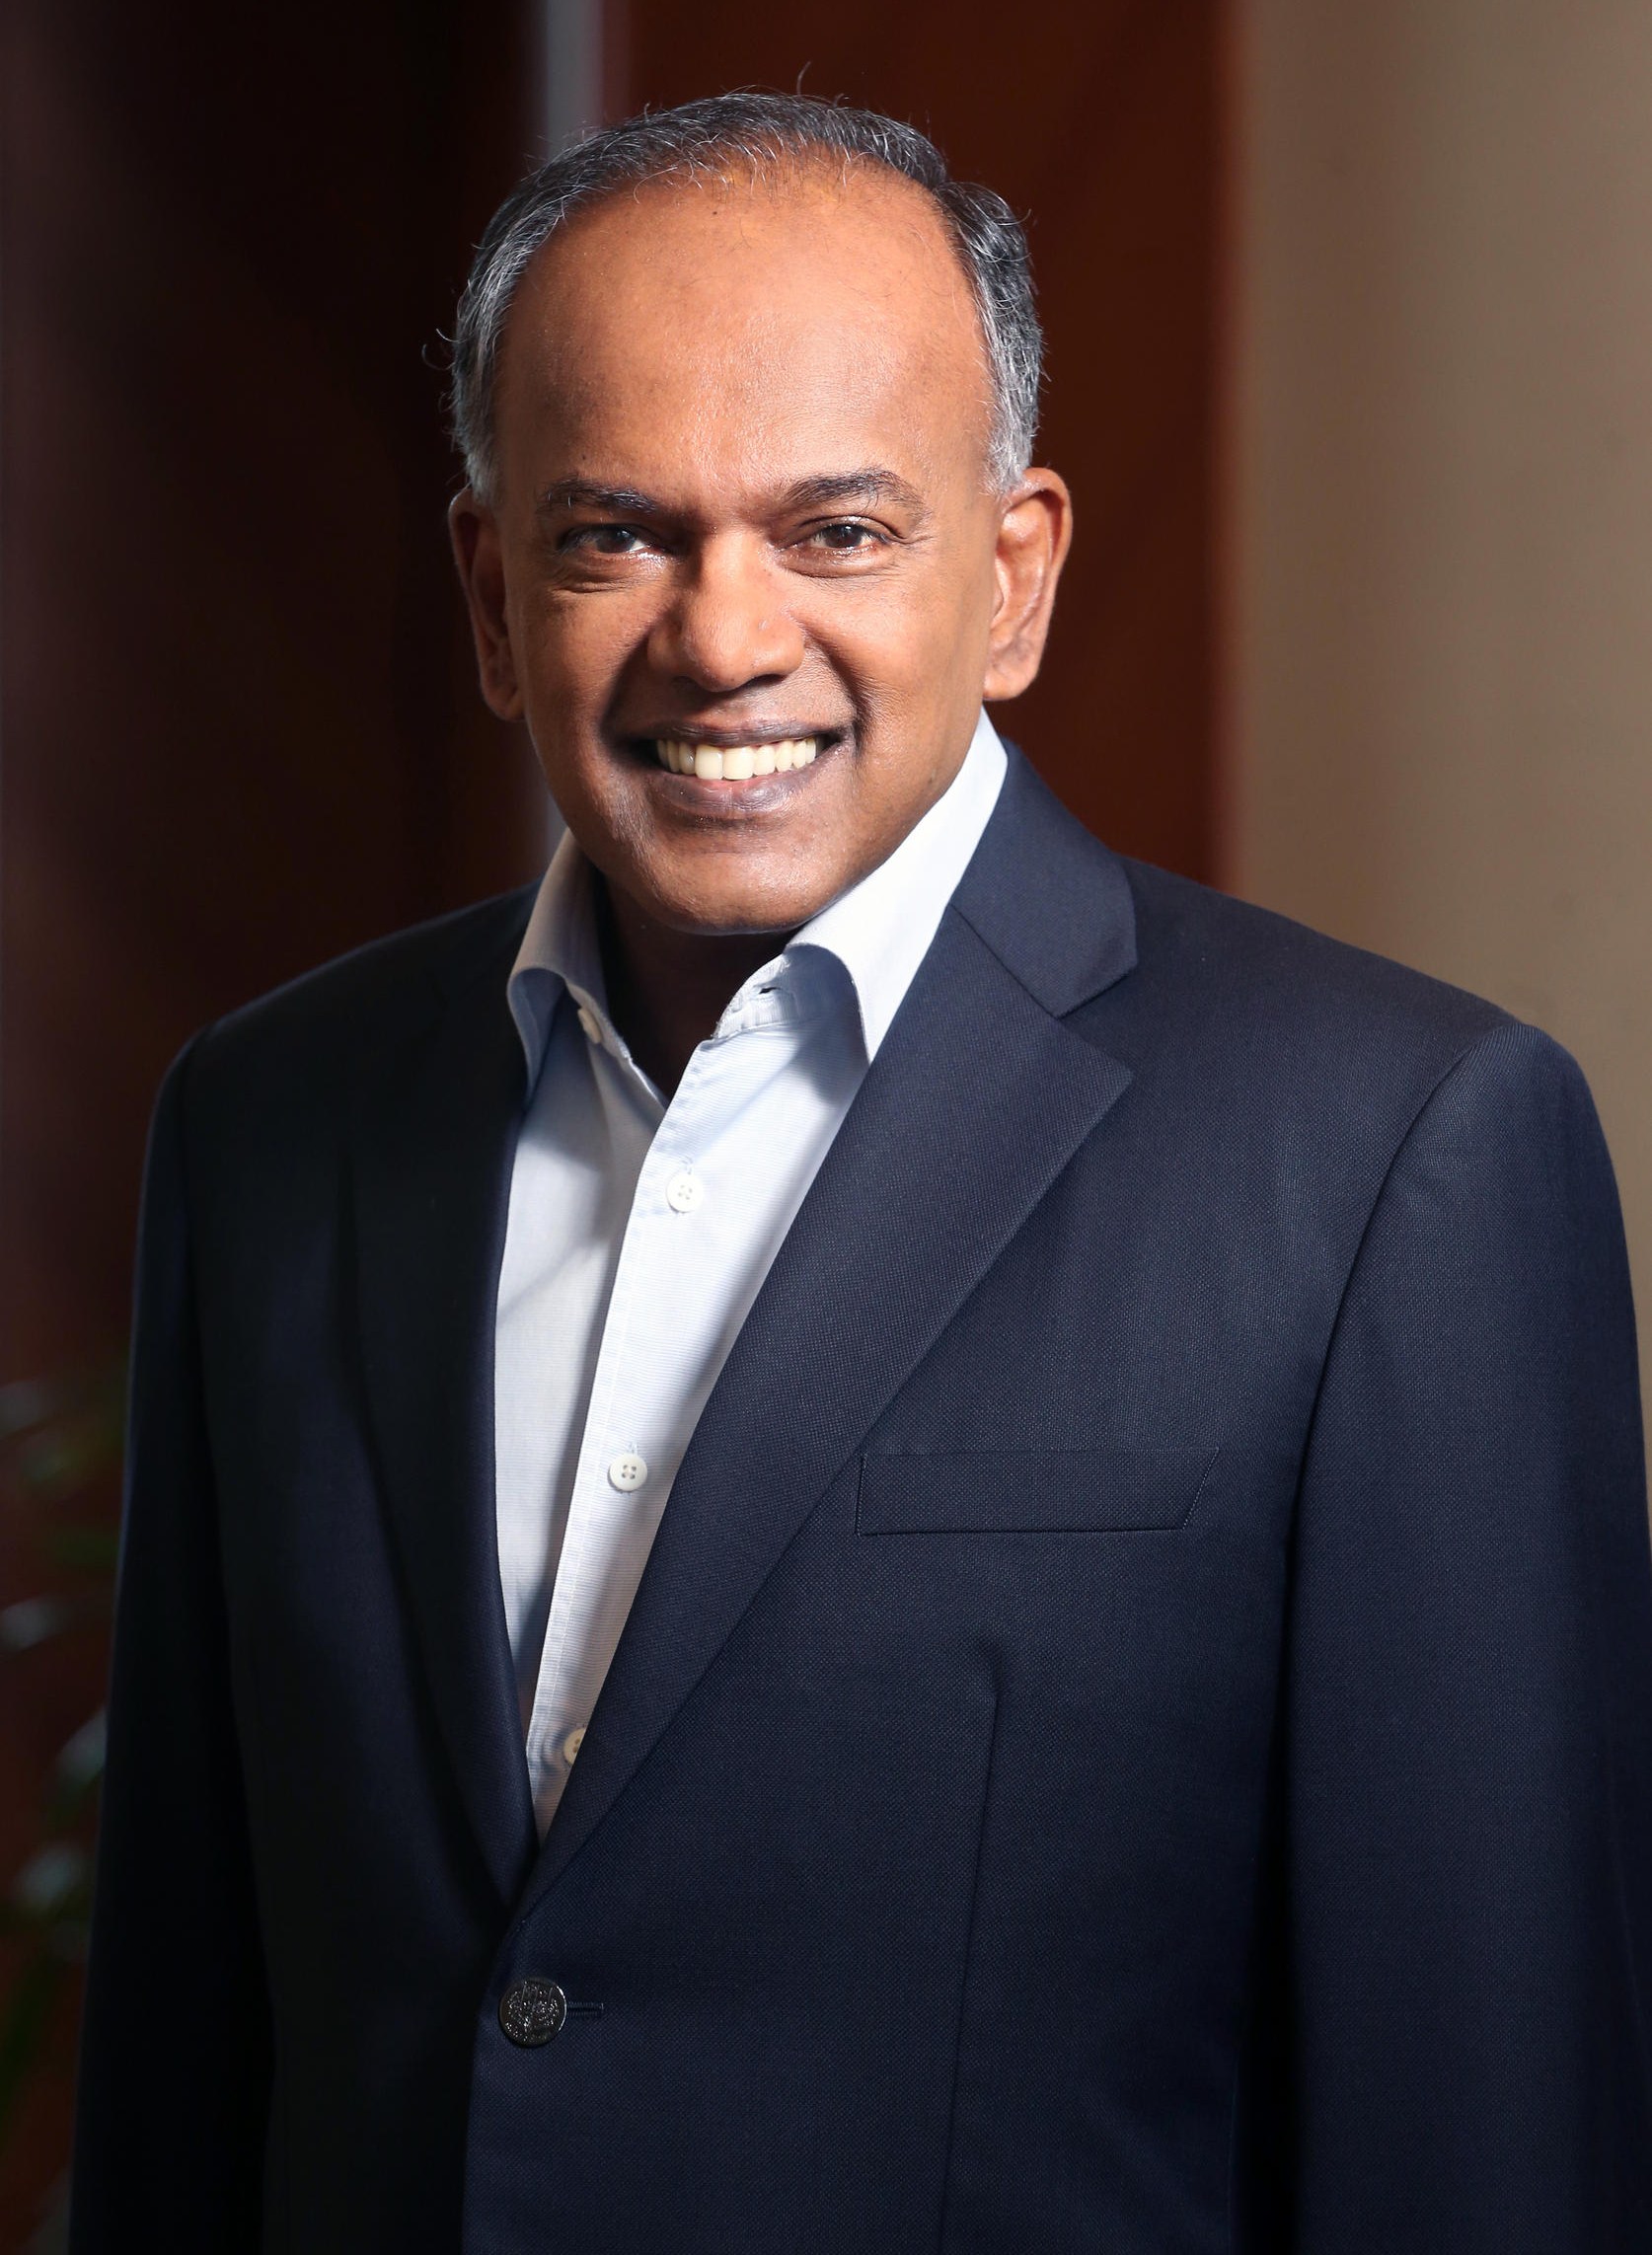 FCA Lunch Forum with Minister K Shanmugam on 2 Dec 2016